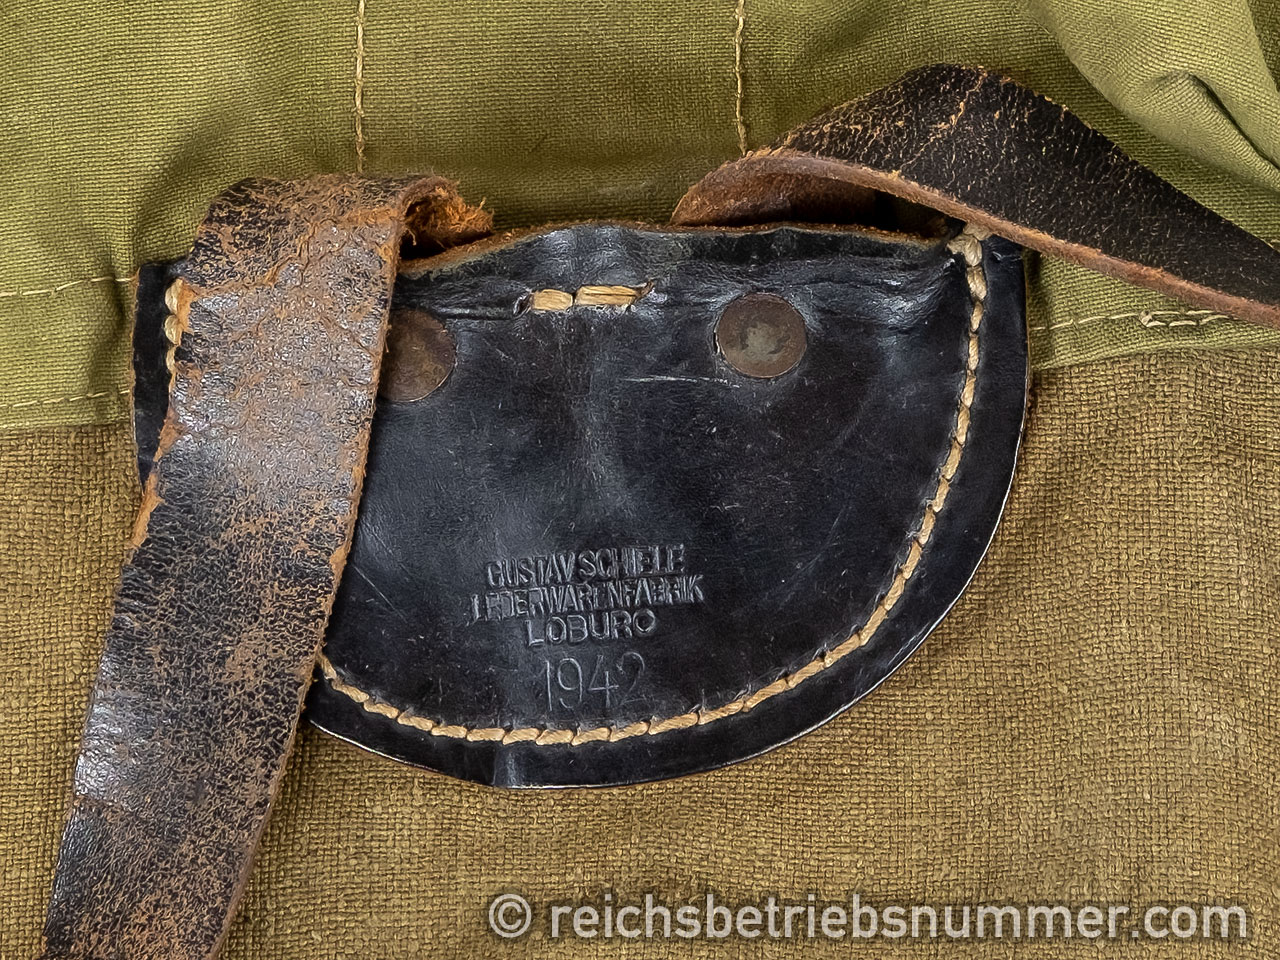 a 1942 Artillery-Backpack with maker marking of the leather goods factory Gustav Schiele from Loburg